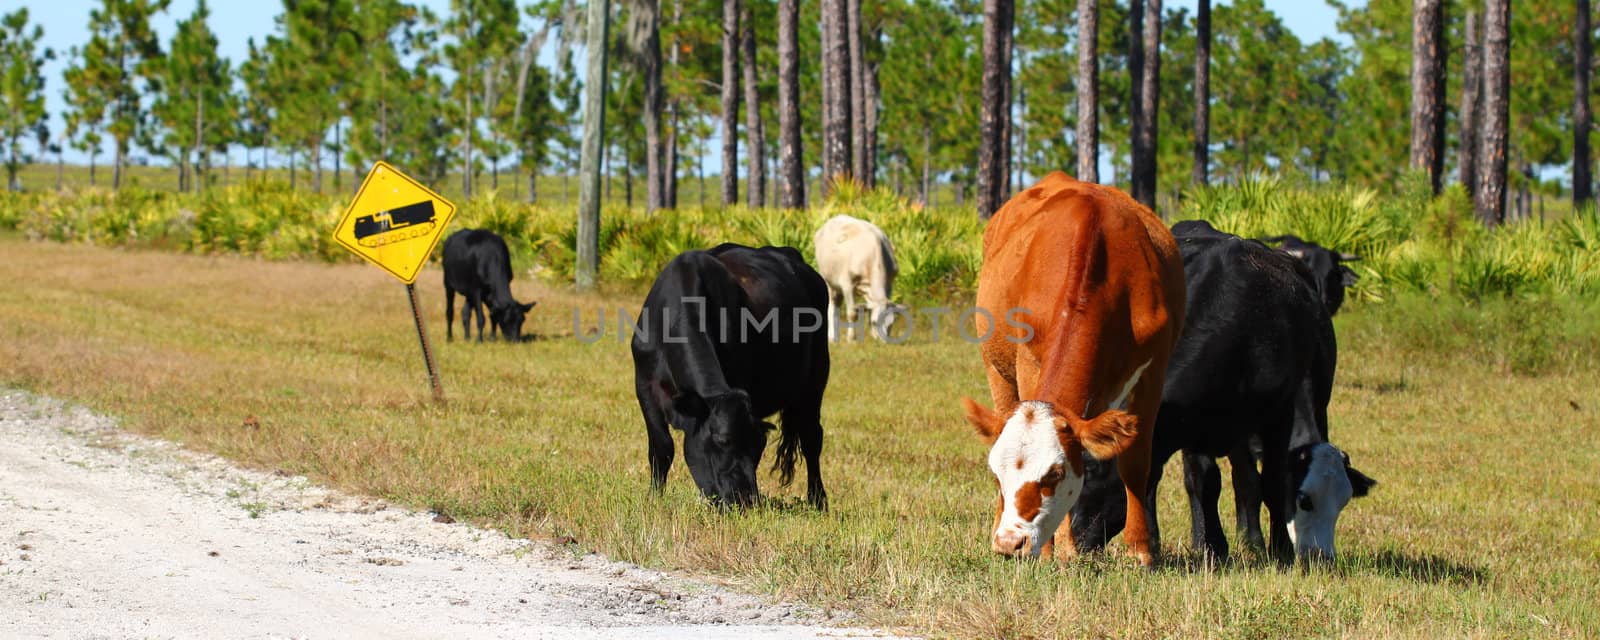 Cows graze on grass at a military base in Florida.